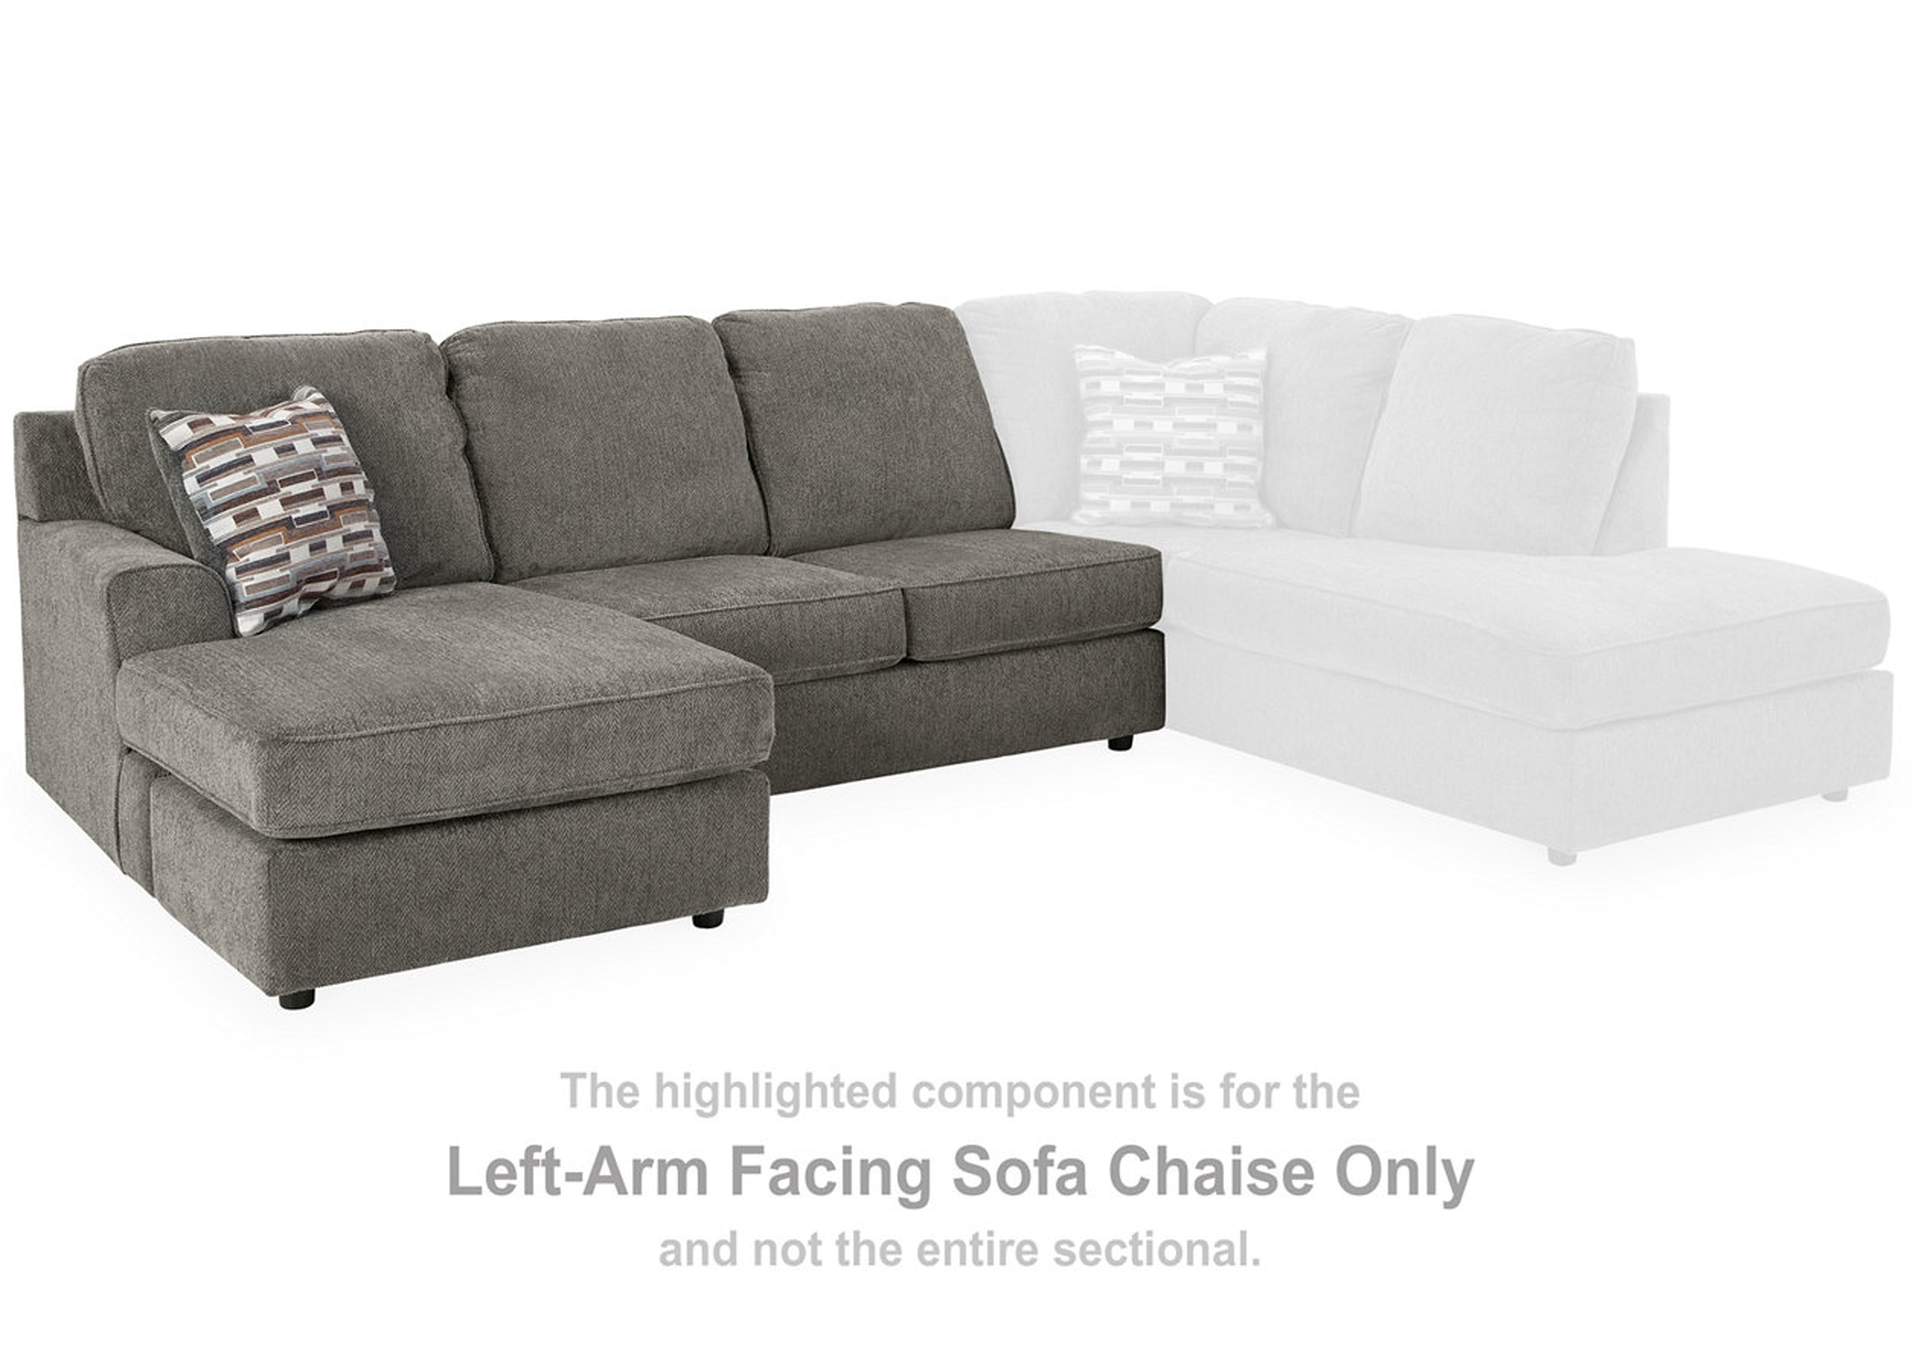 O'Phannon 2-Piece Sectional with Chaise,Signature Design By Ashley